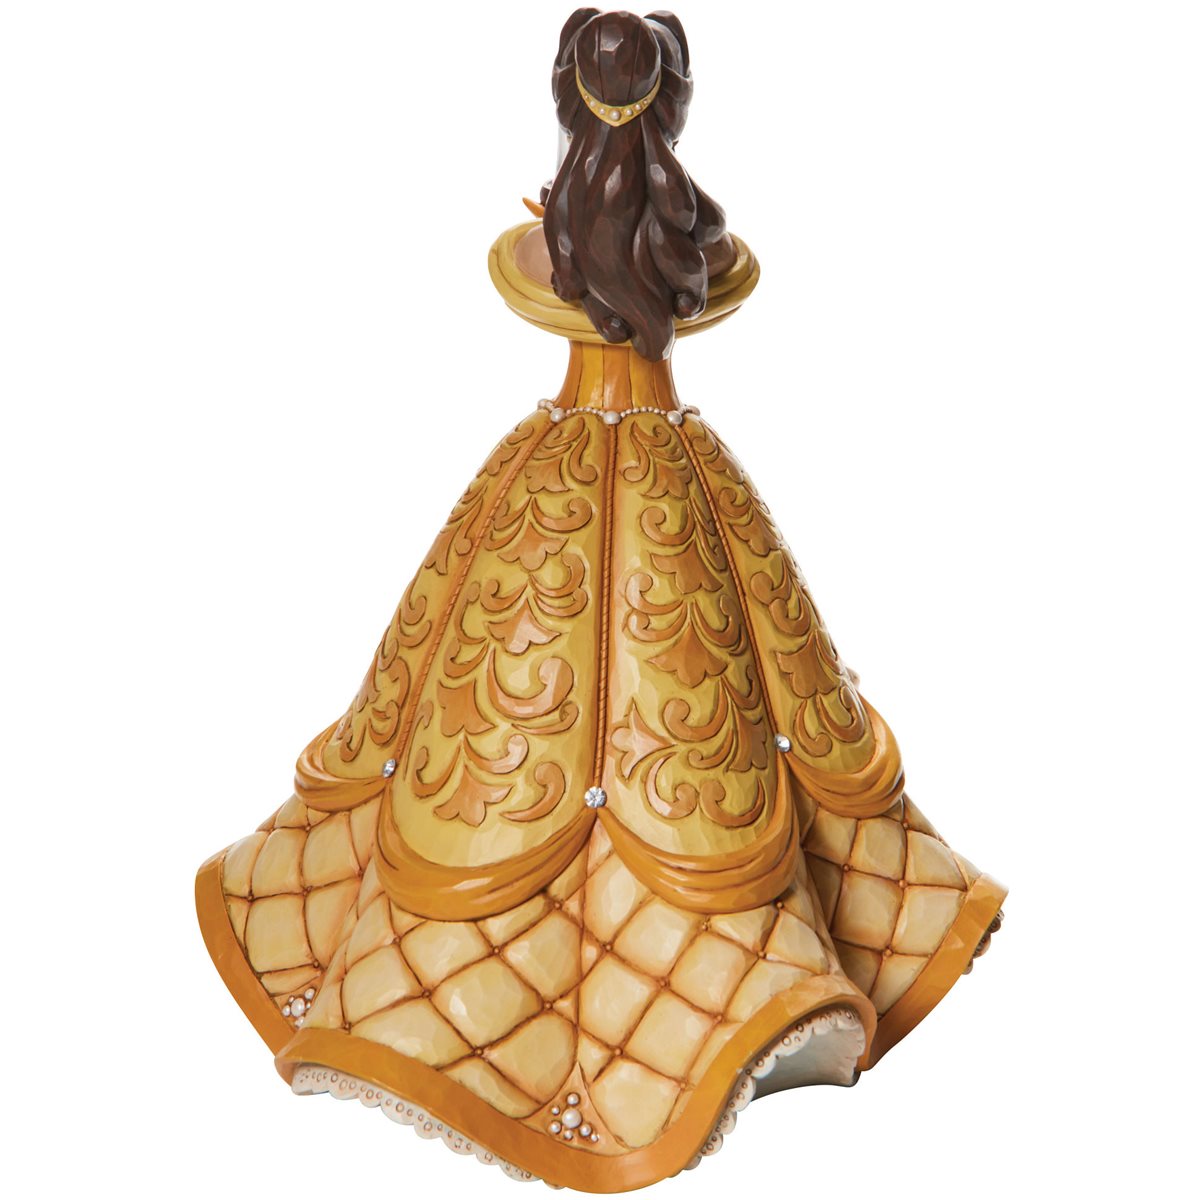 Disney Traditions Figurine - Beauty And The Beast - Belle An Enchanted Rose